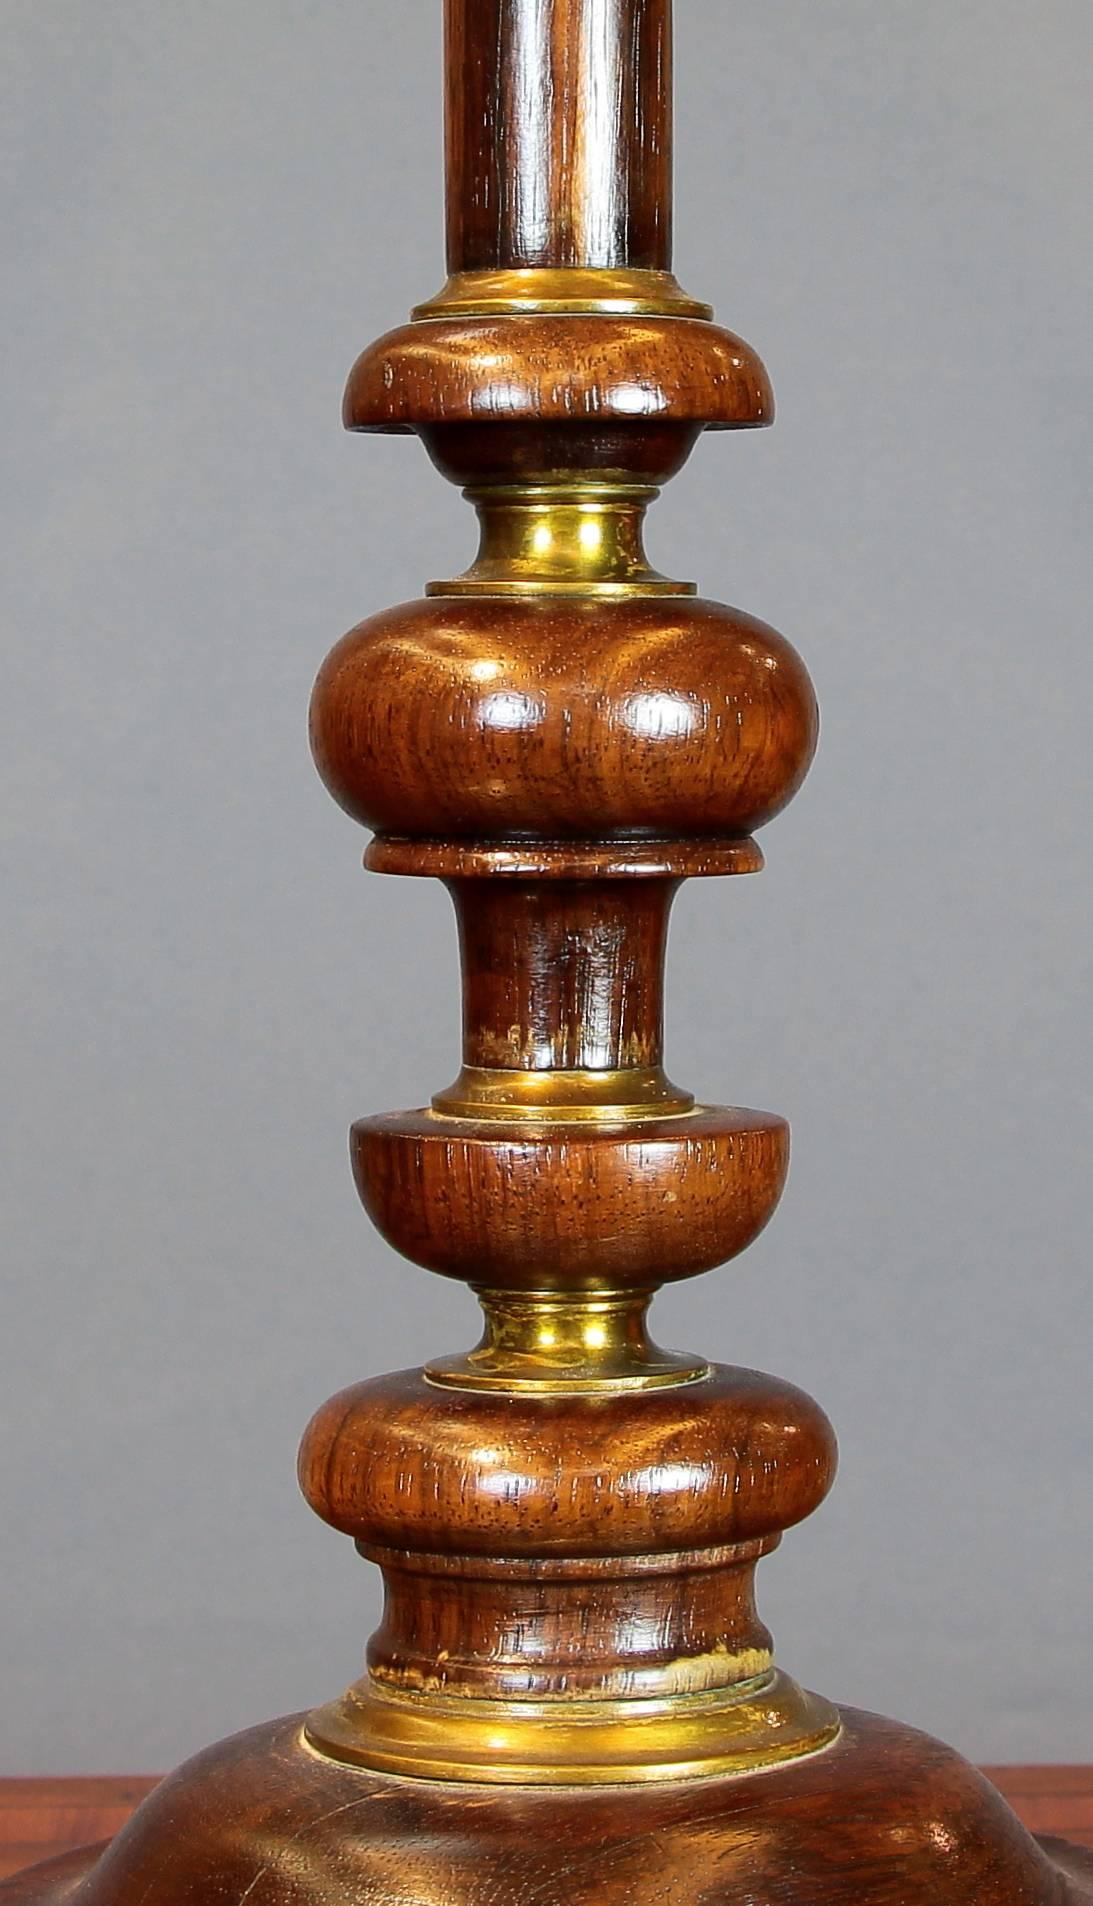 A set of six 17th century Brazilian rosewood candlesticks
17th century Portuguese work, so called 